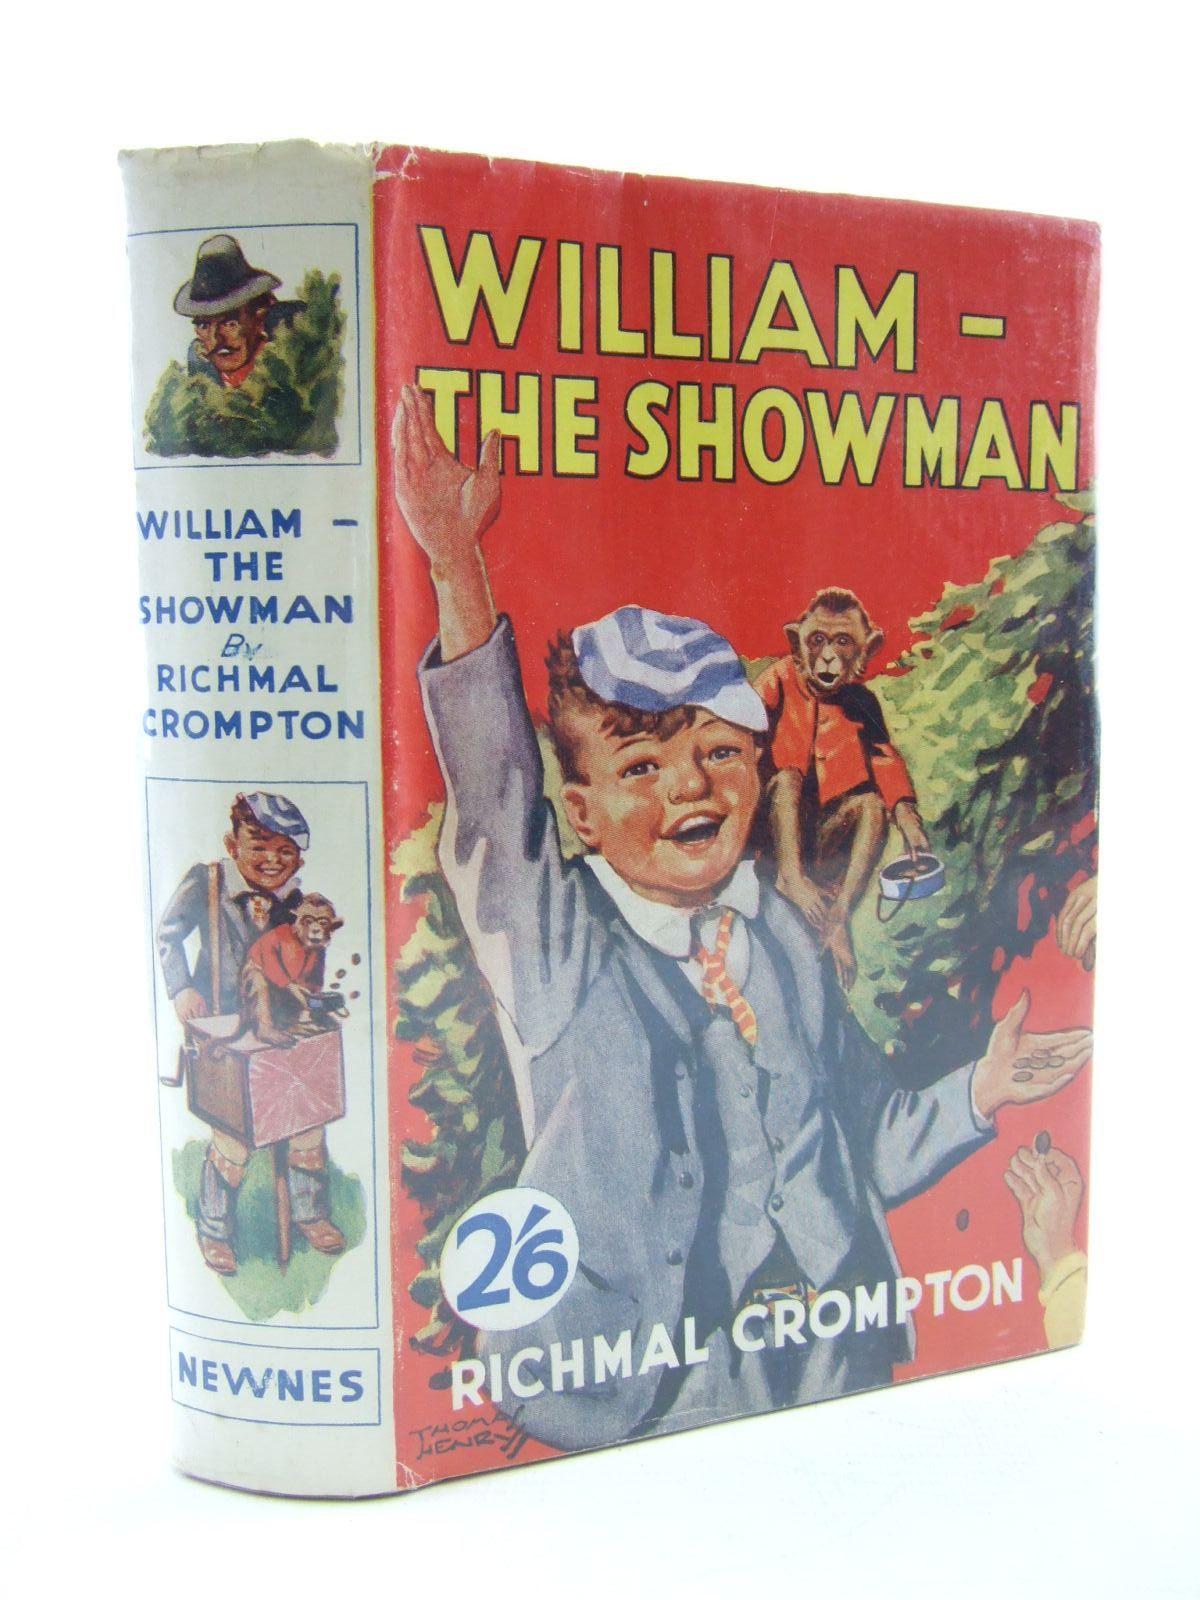 Cover of WILLIAM-THE SHOWMAN by Richmal Crompton